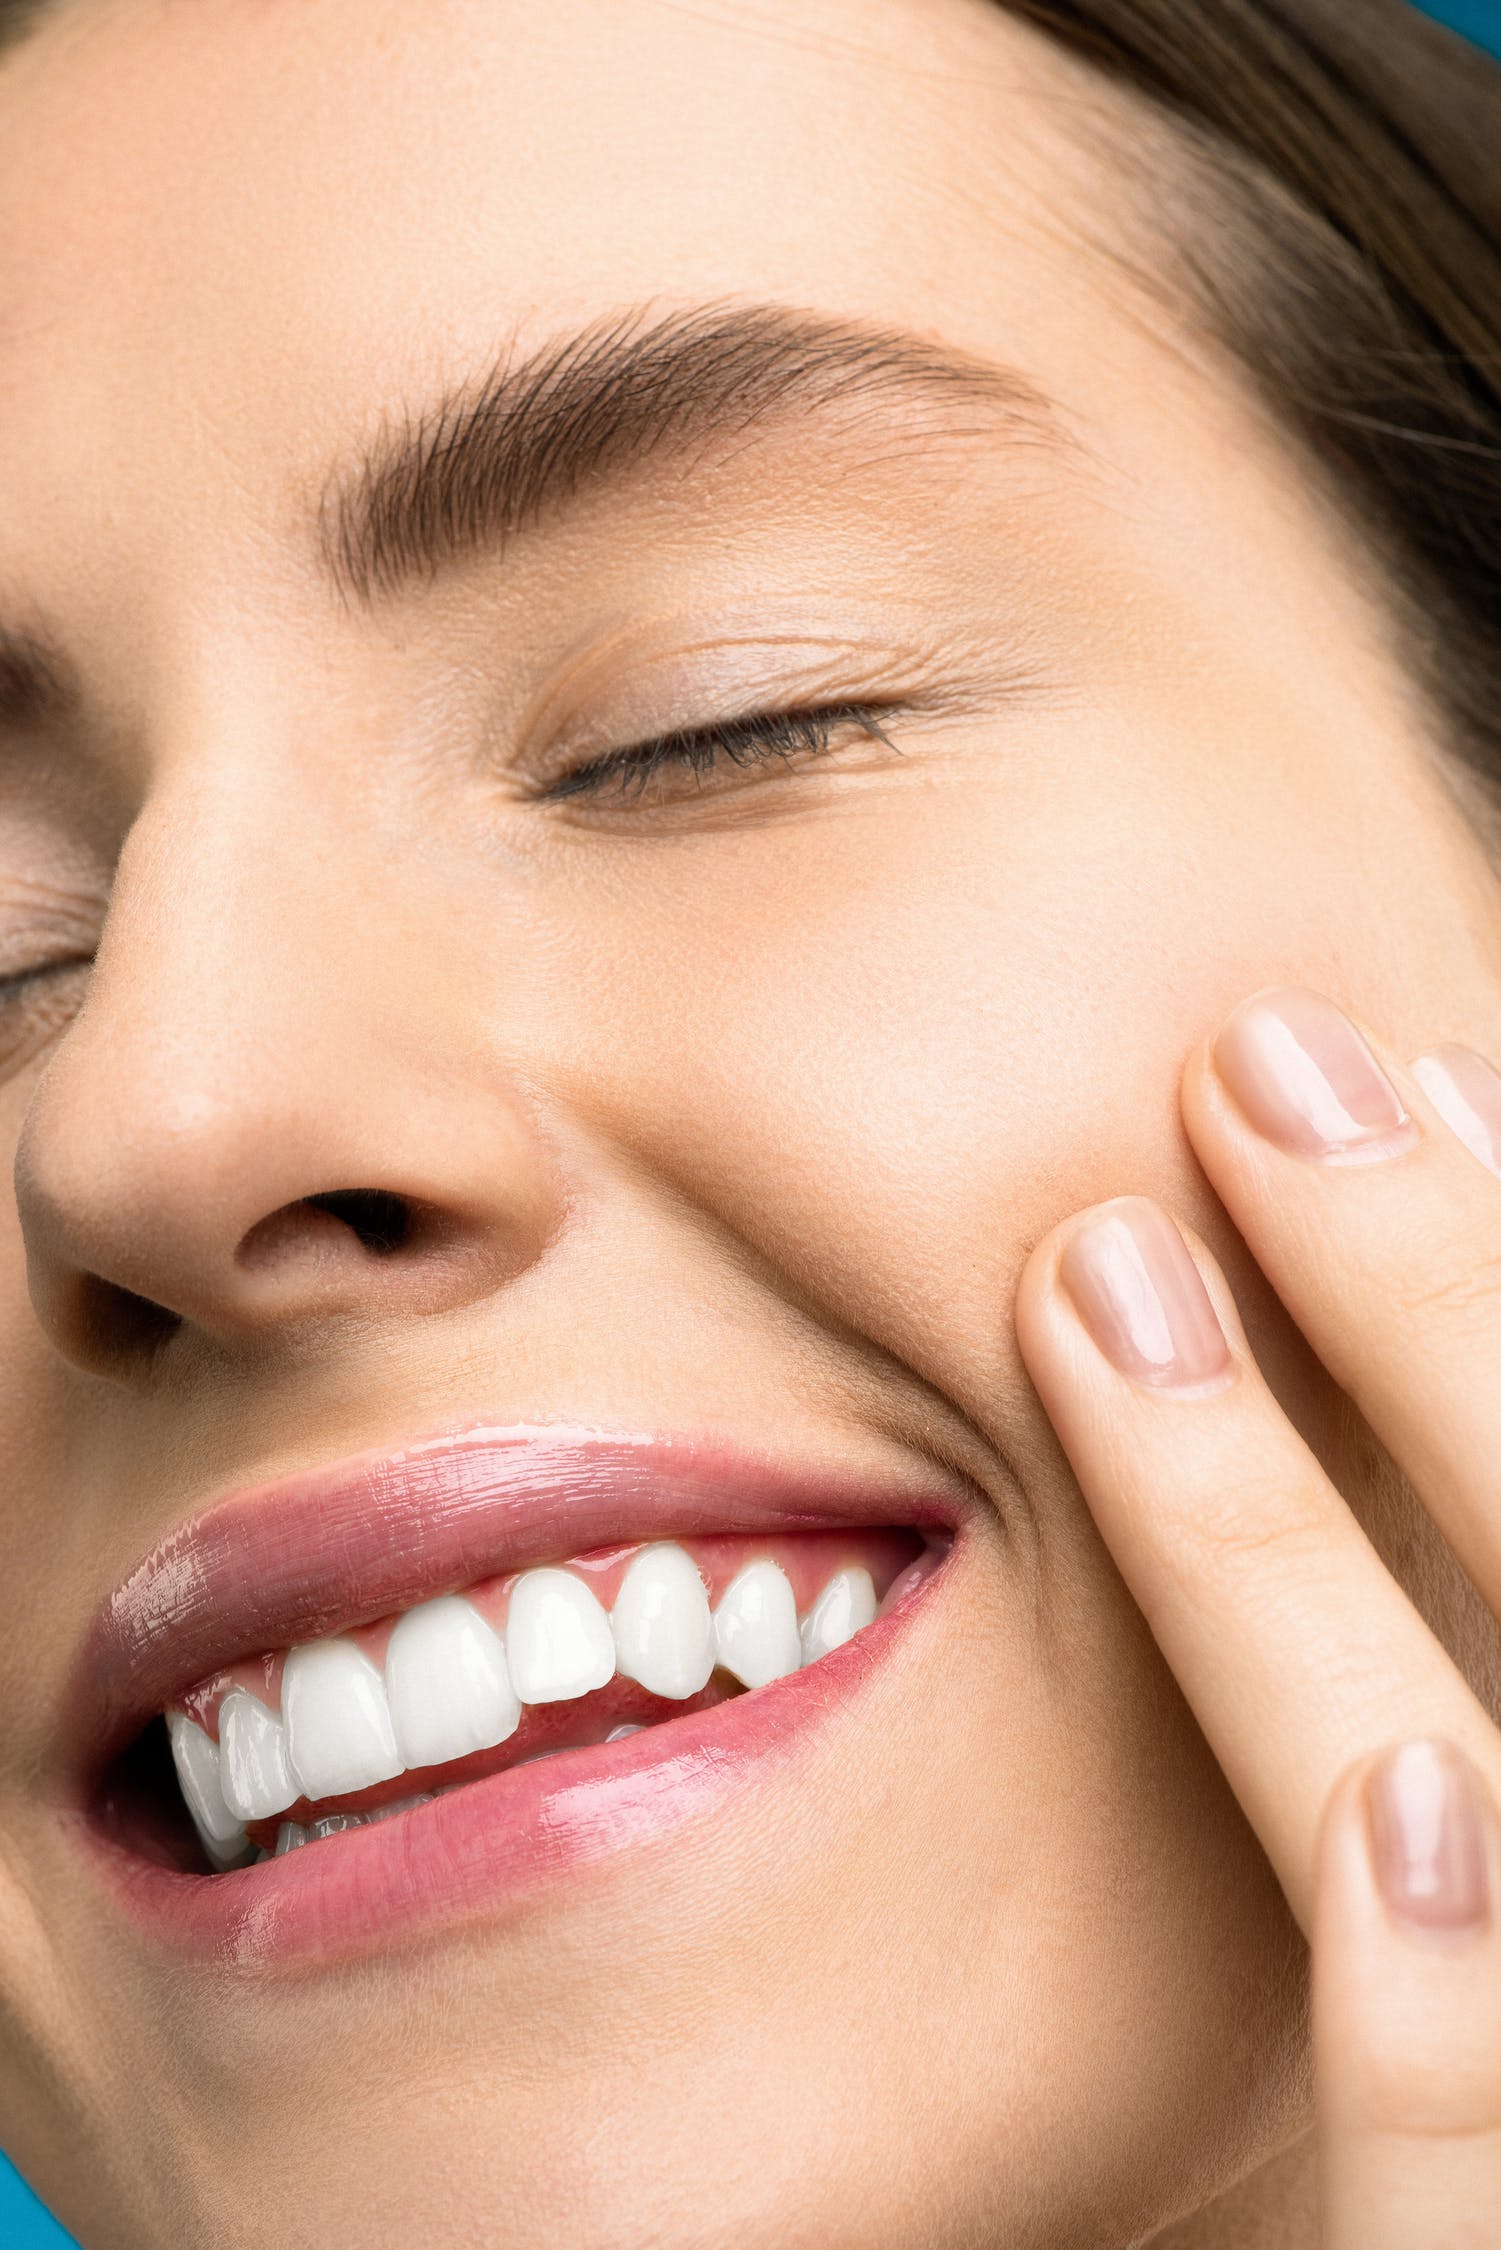 Follow These Tips For Healthier Teeth And A Prettier Smile